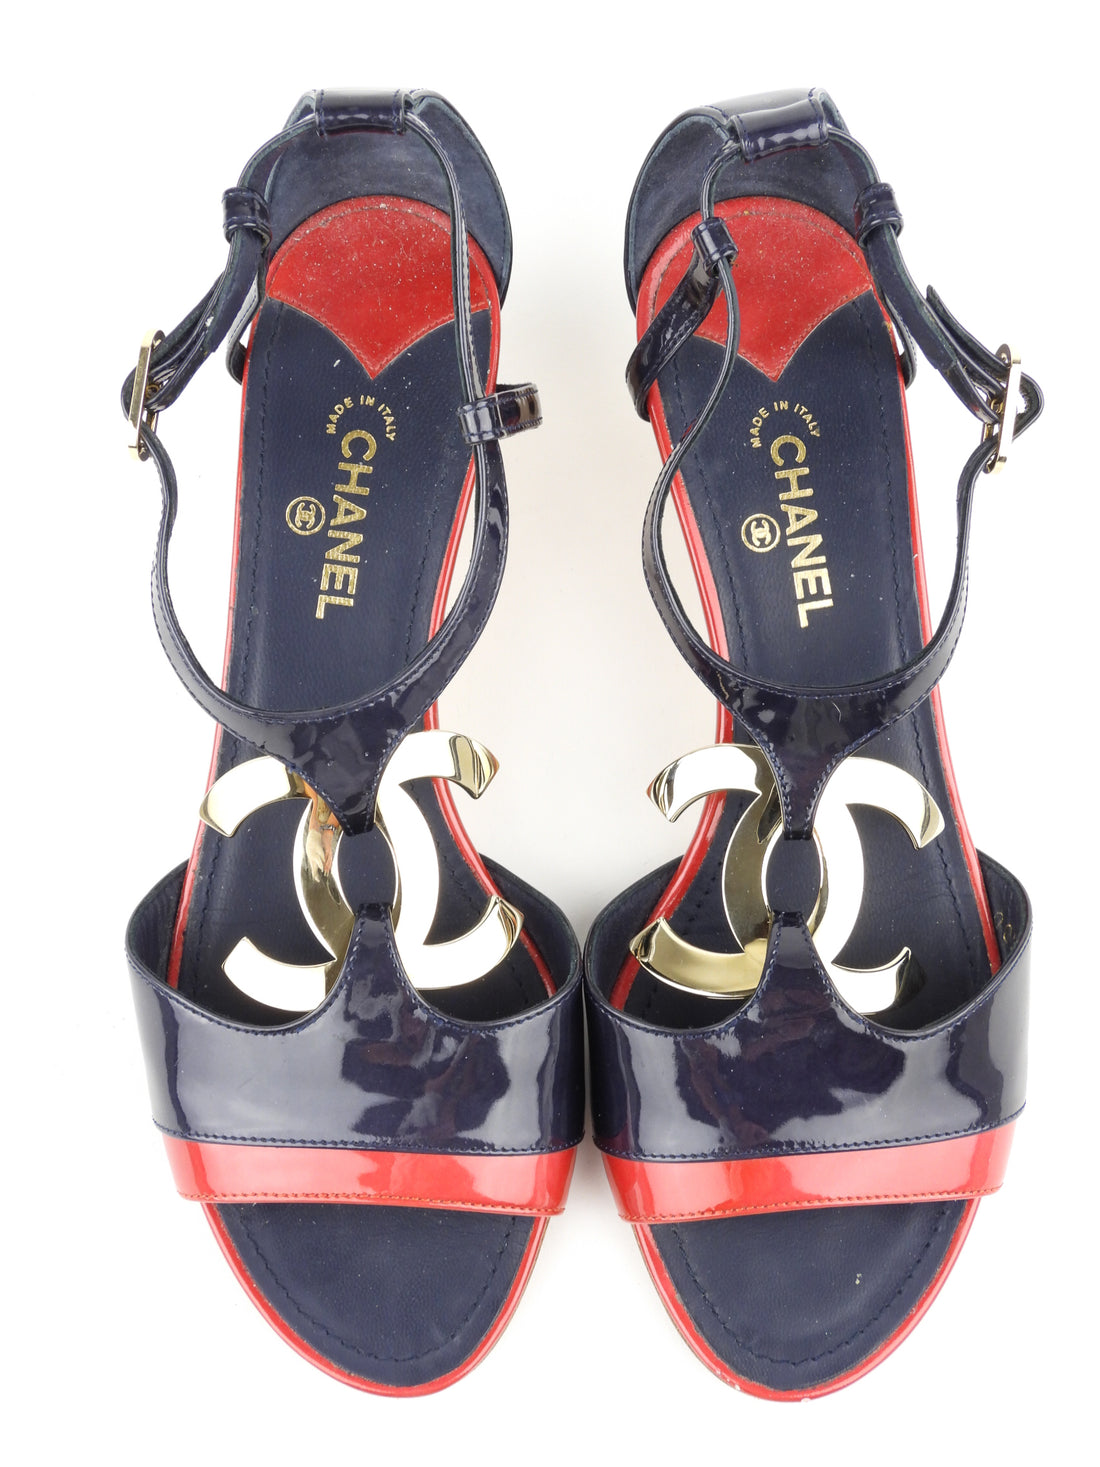 Chanel Navy and Red Patent Leather CC Wedge Sandals - 38